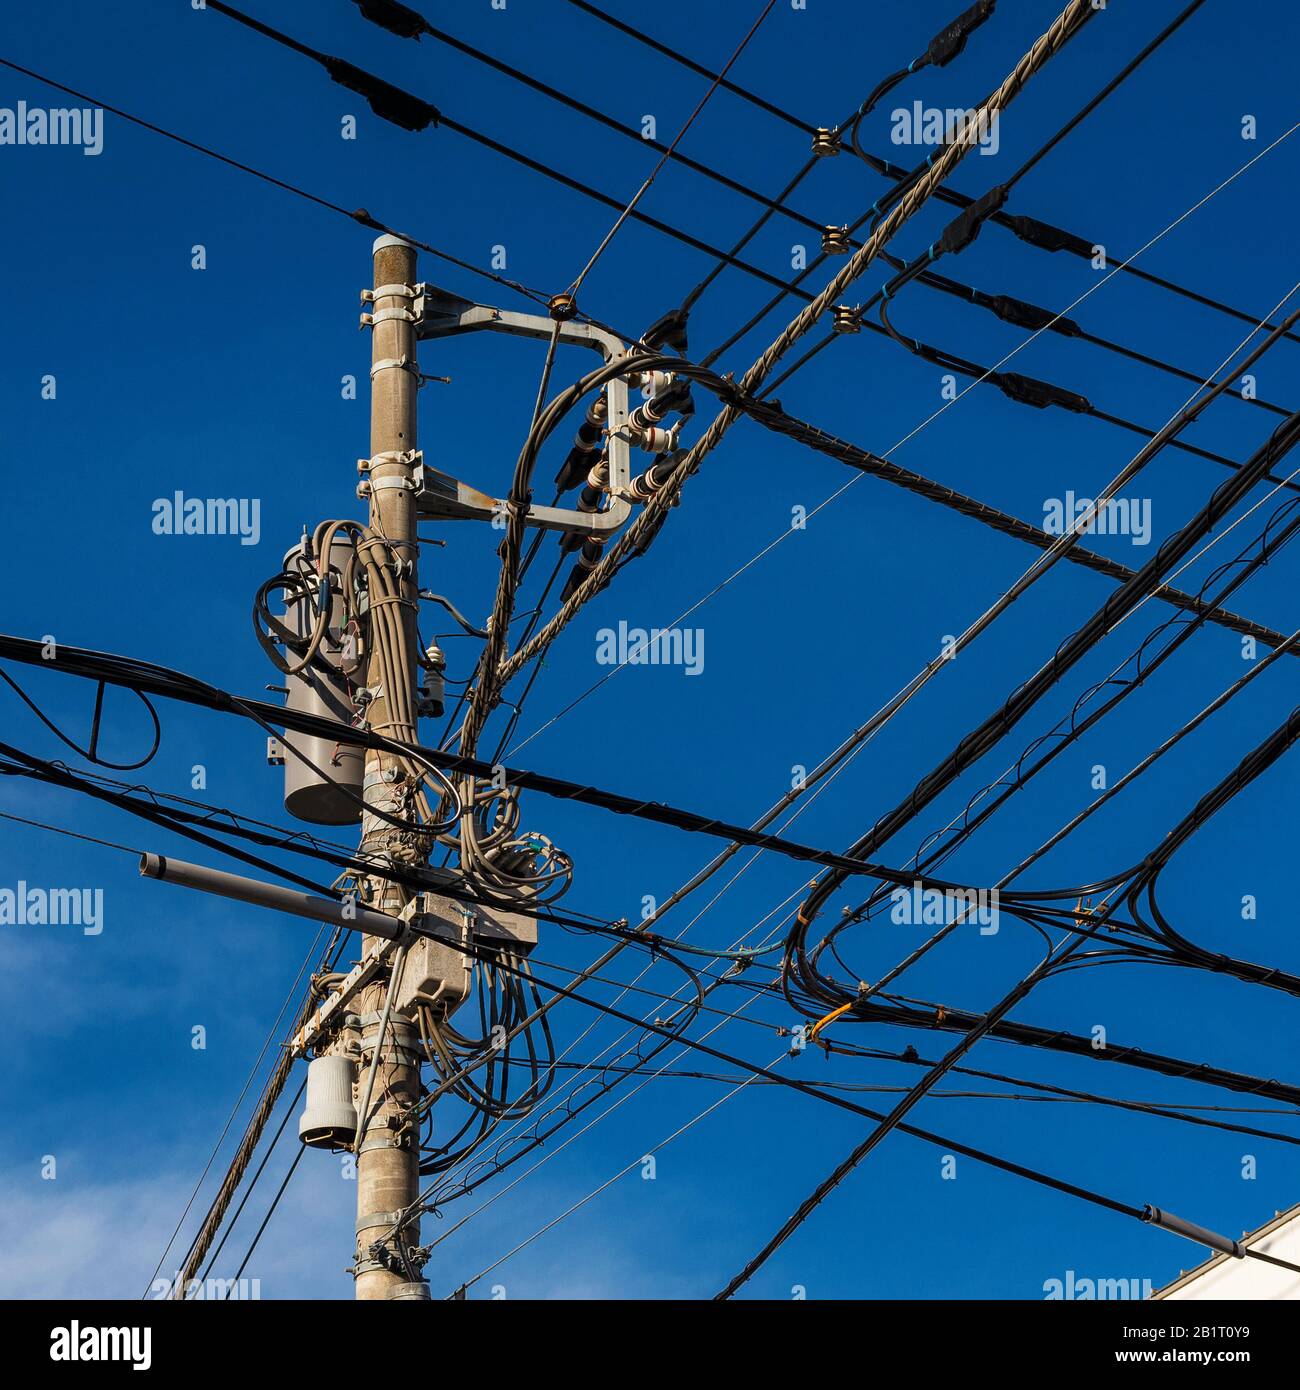 Electric power industry. Characteristic utility and transmission pole and overhead power lines in Japan Stock Photo